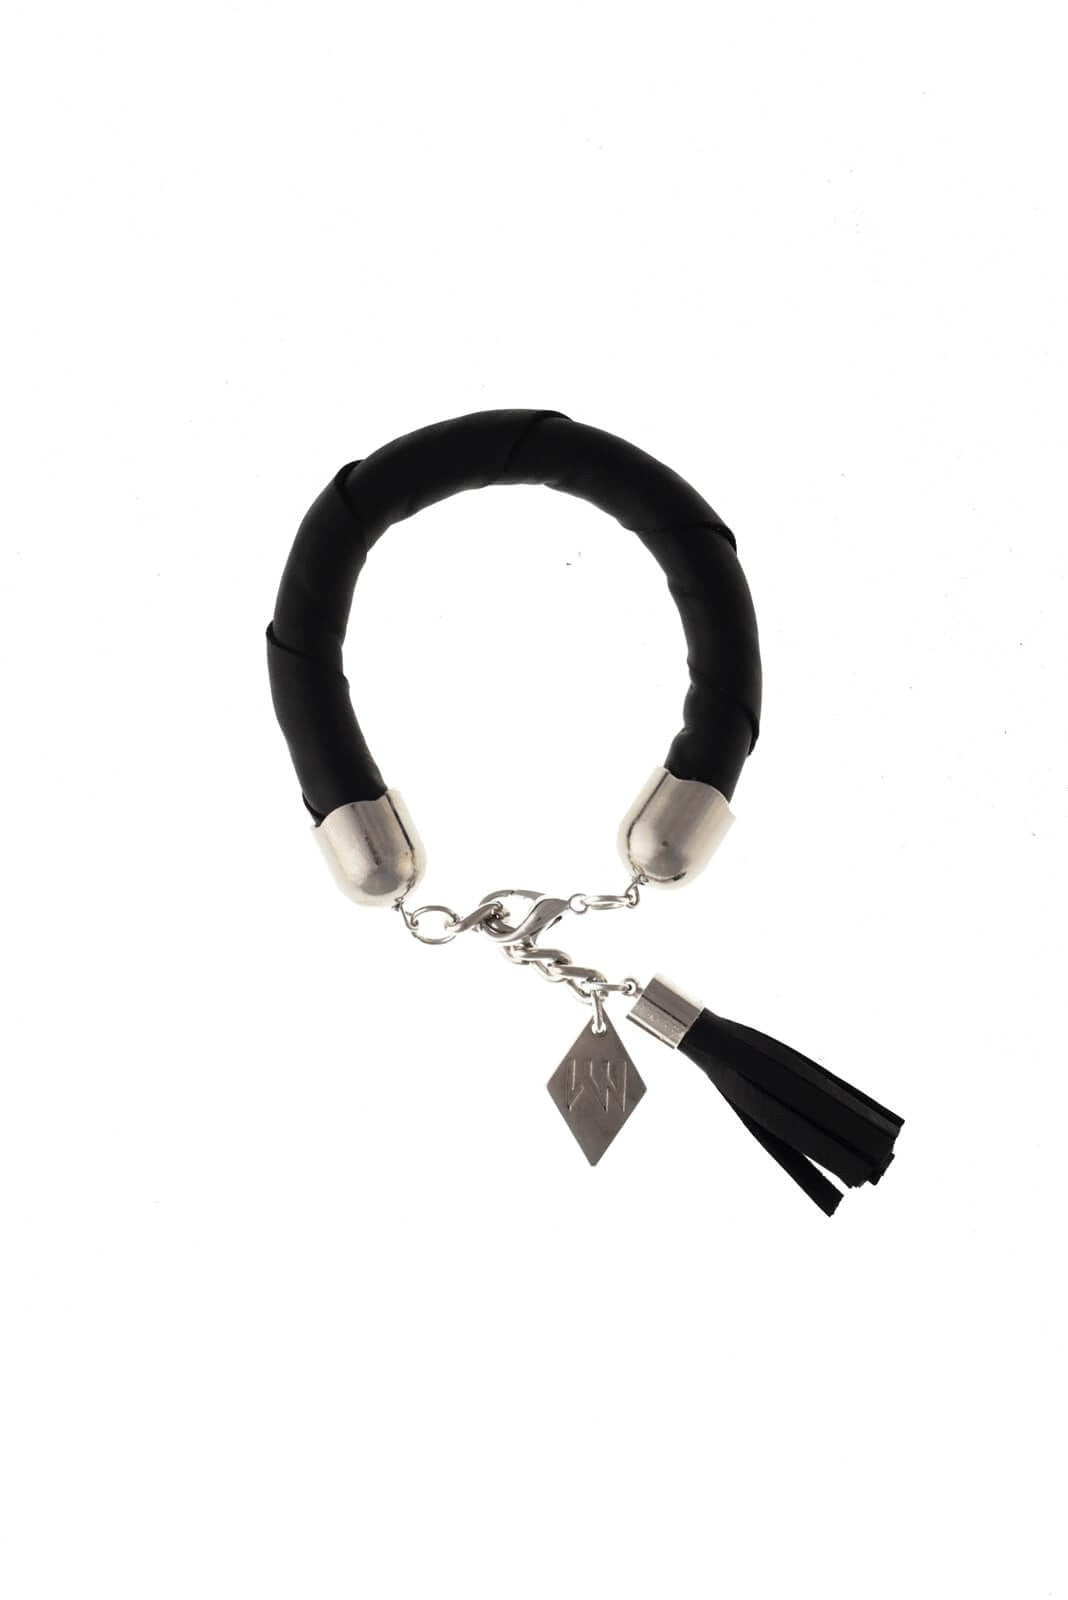 The no. 4 edition of the handcuff bracelet is made of black leather with galvanized metal components and leather tassel. Silver edition. Silver edition.